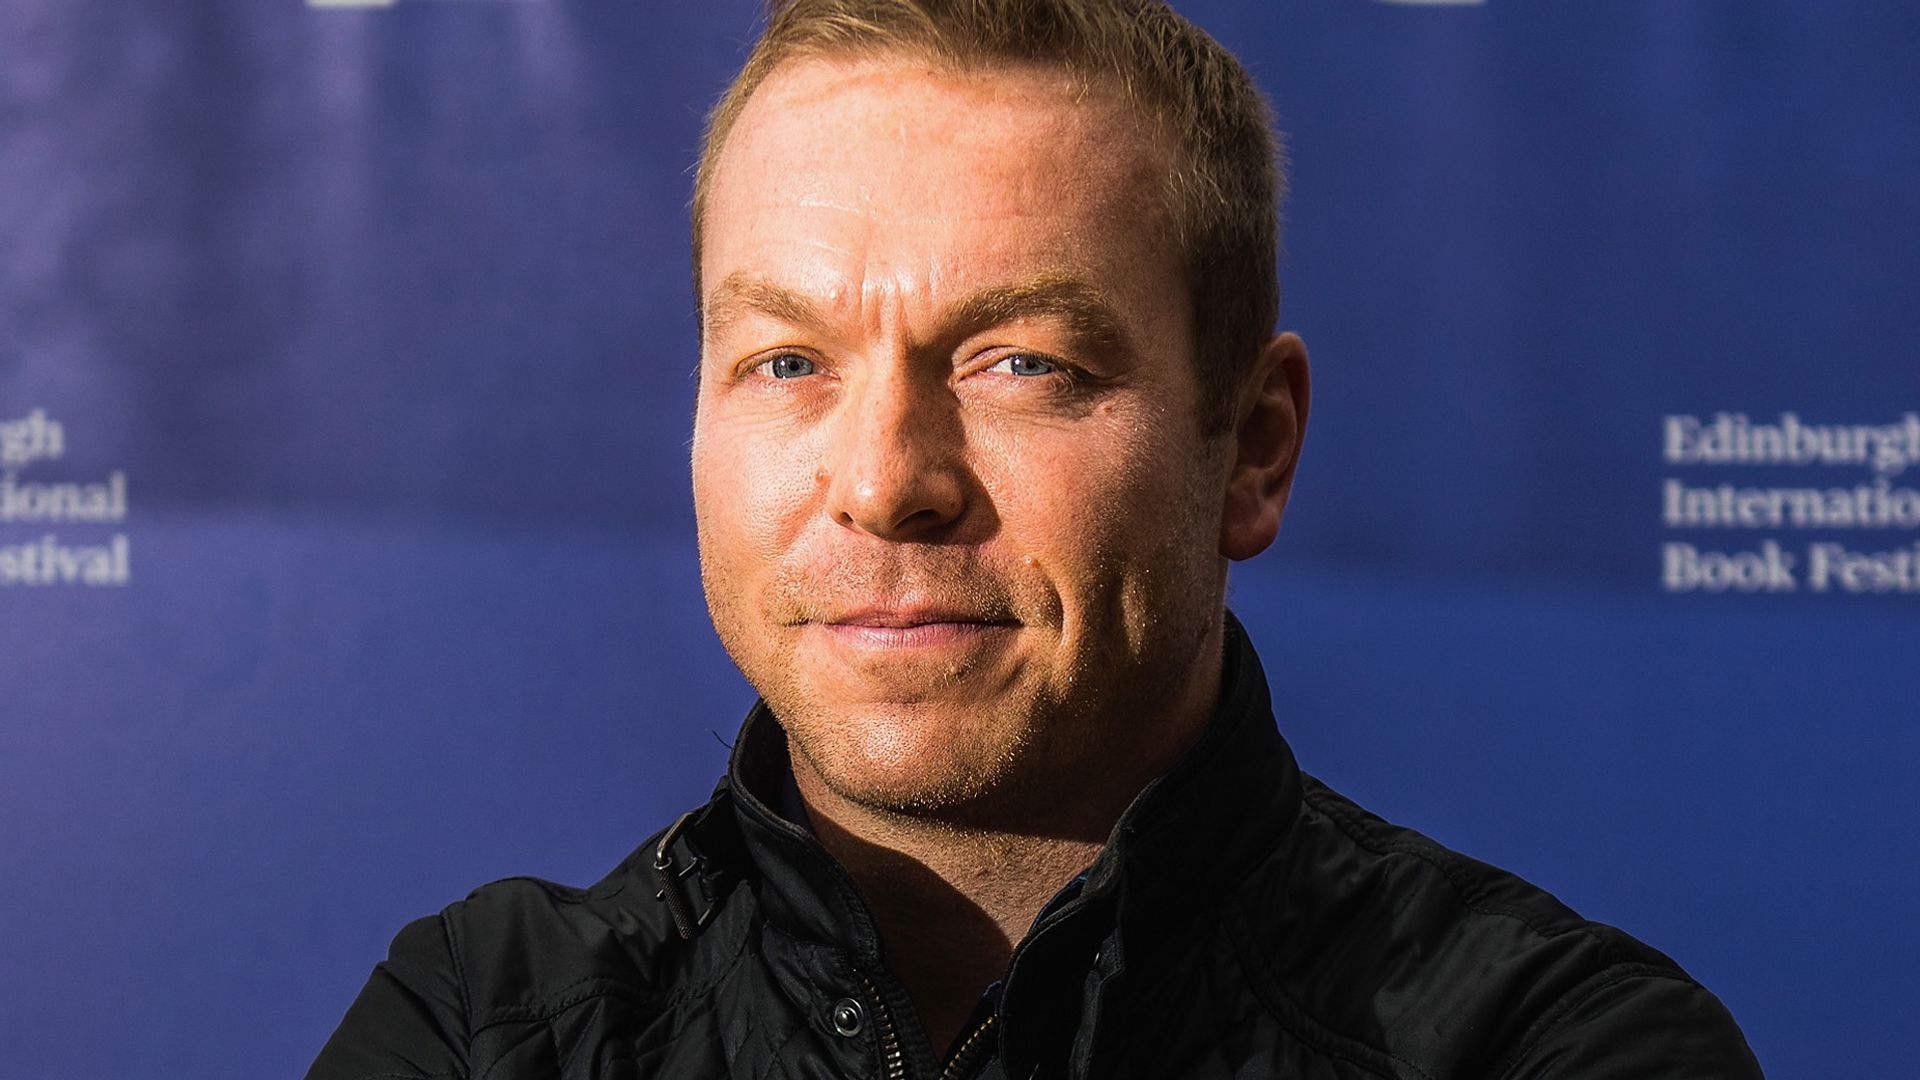 Sir Chris Hoy reveals details of 'shock' cancer diagnosis in heartbreaking statement